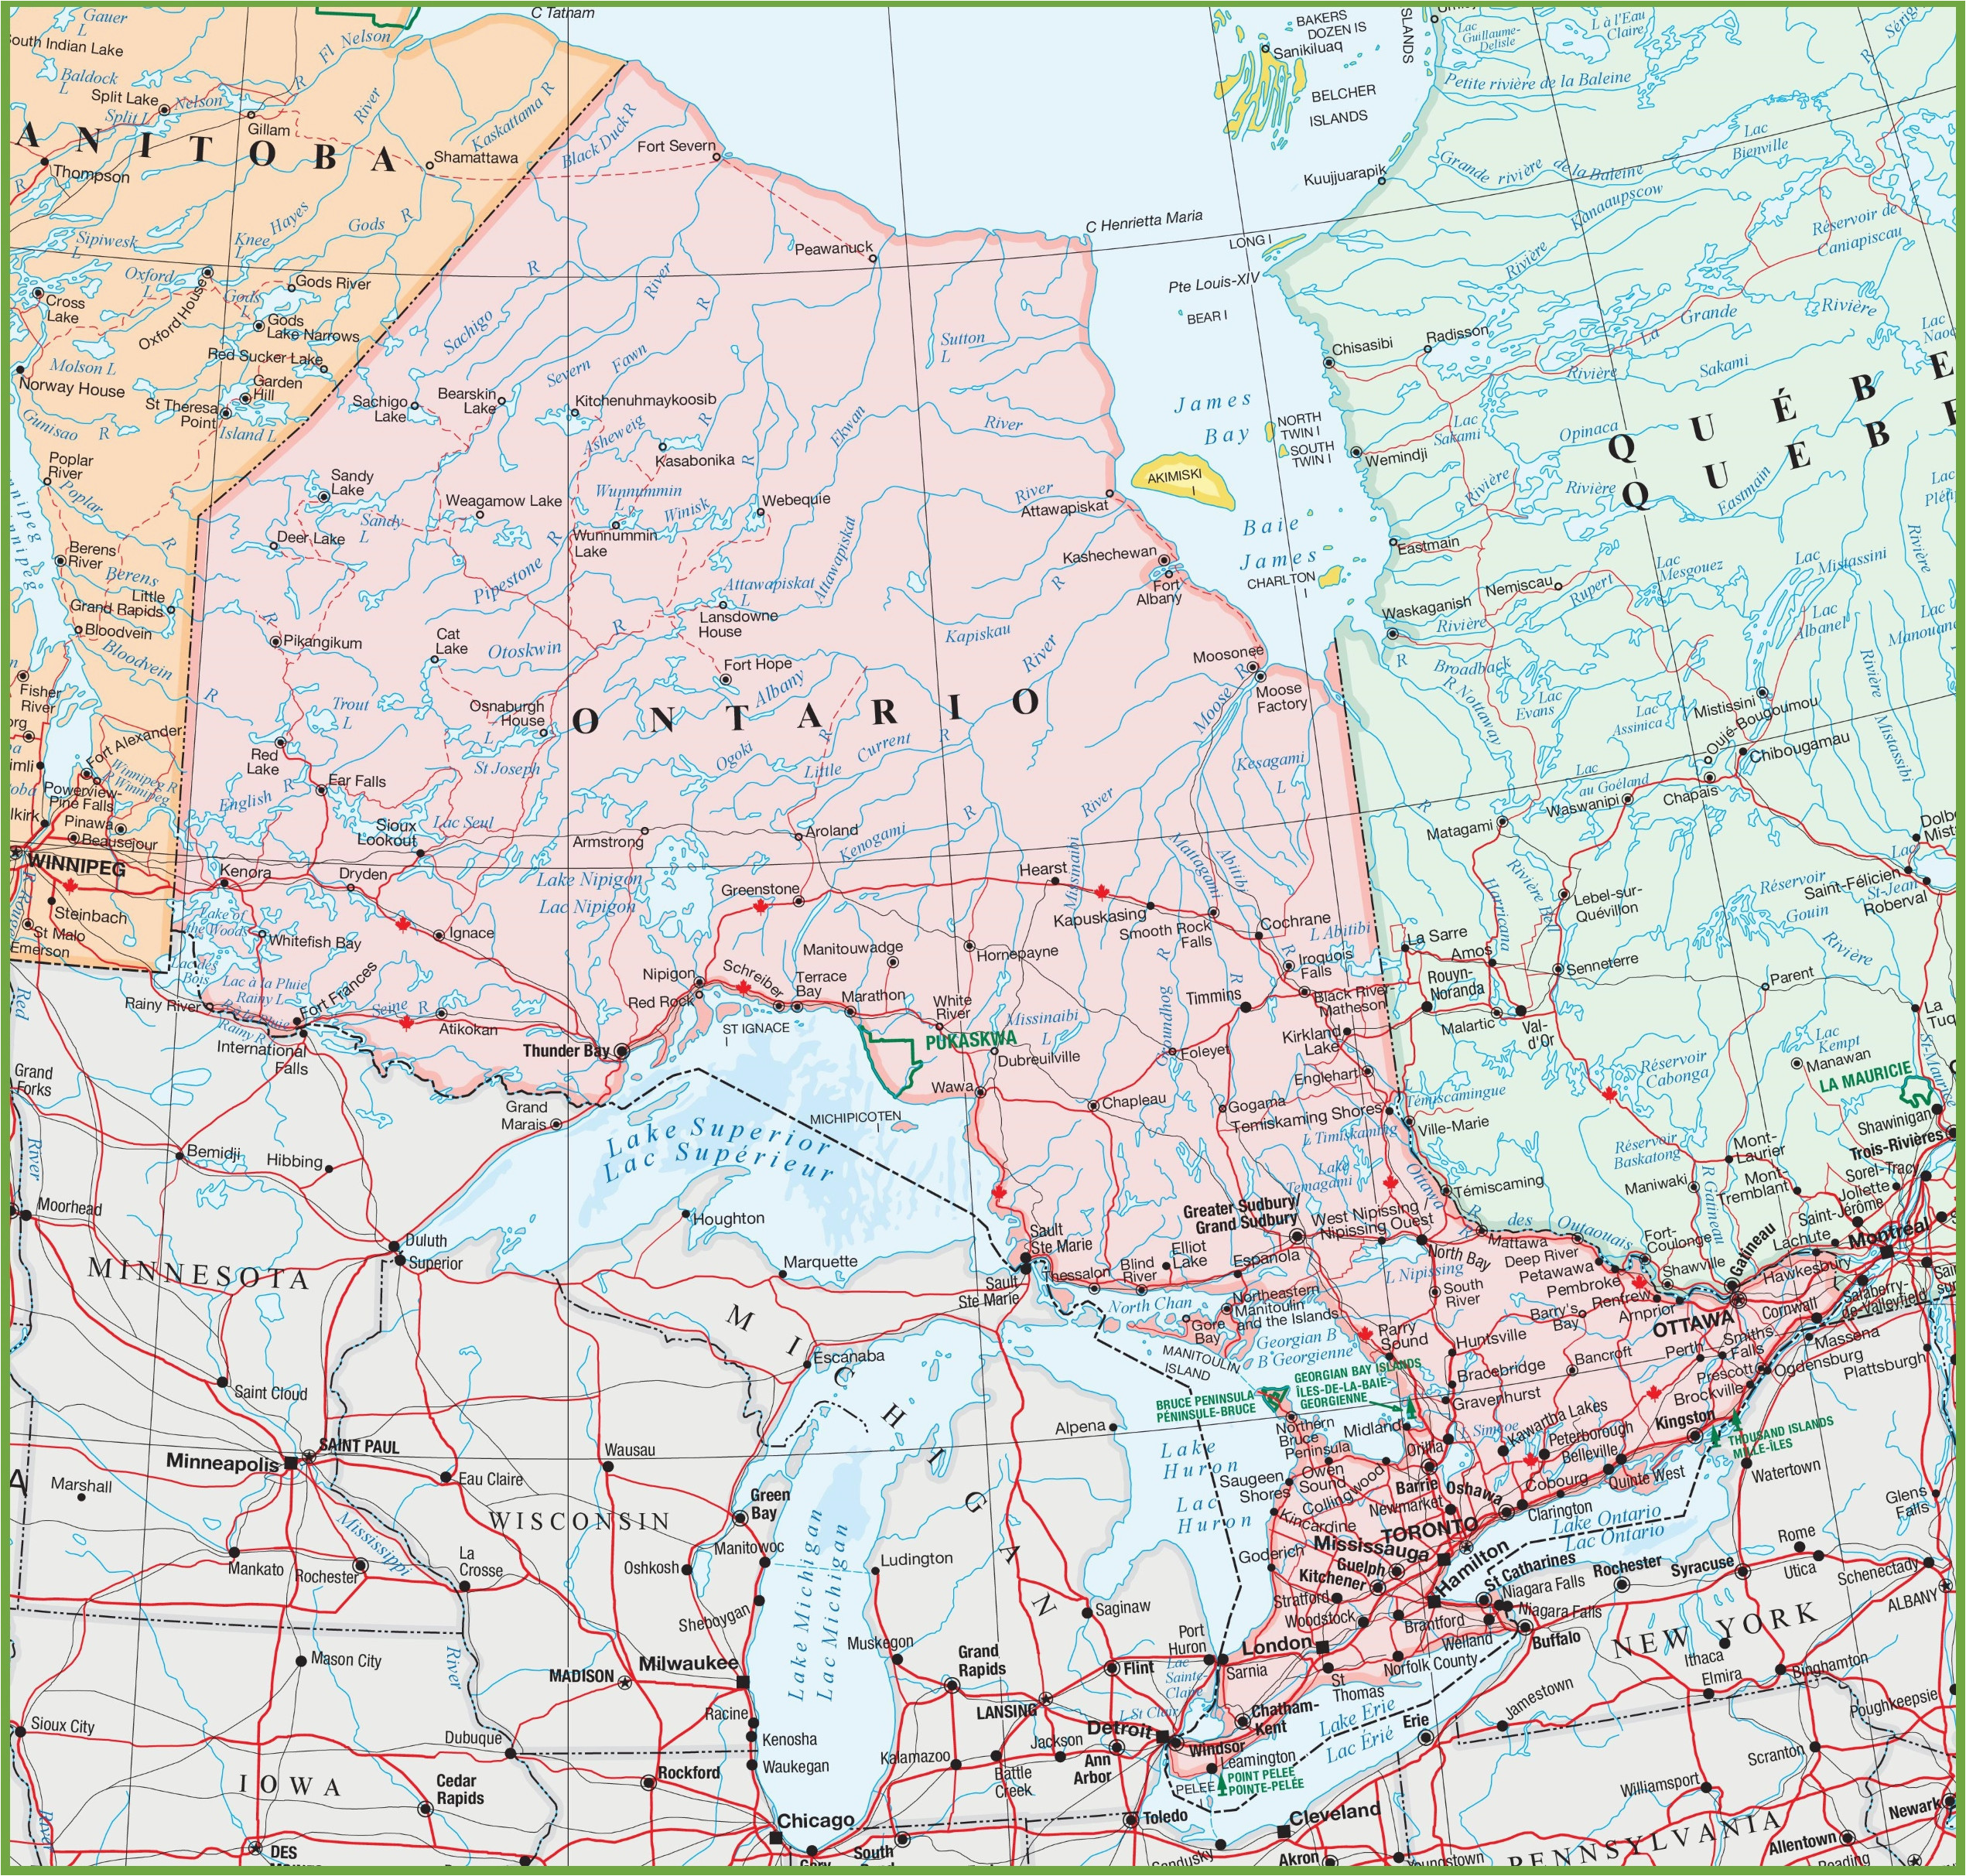 Maps Windsor Ontario Canada Map Of Ontario with Cities and towns